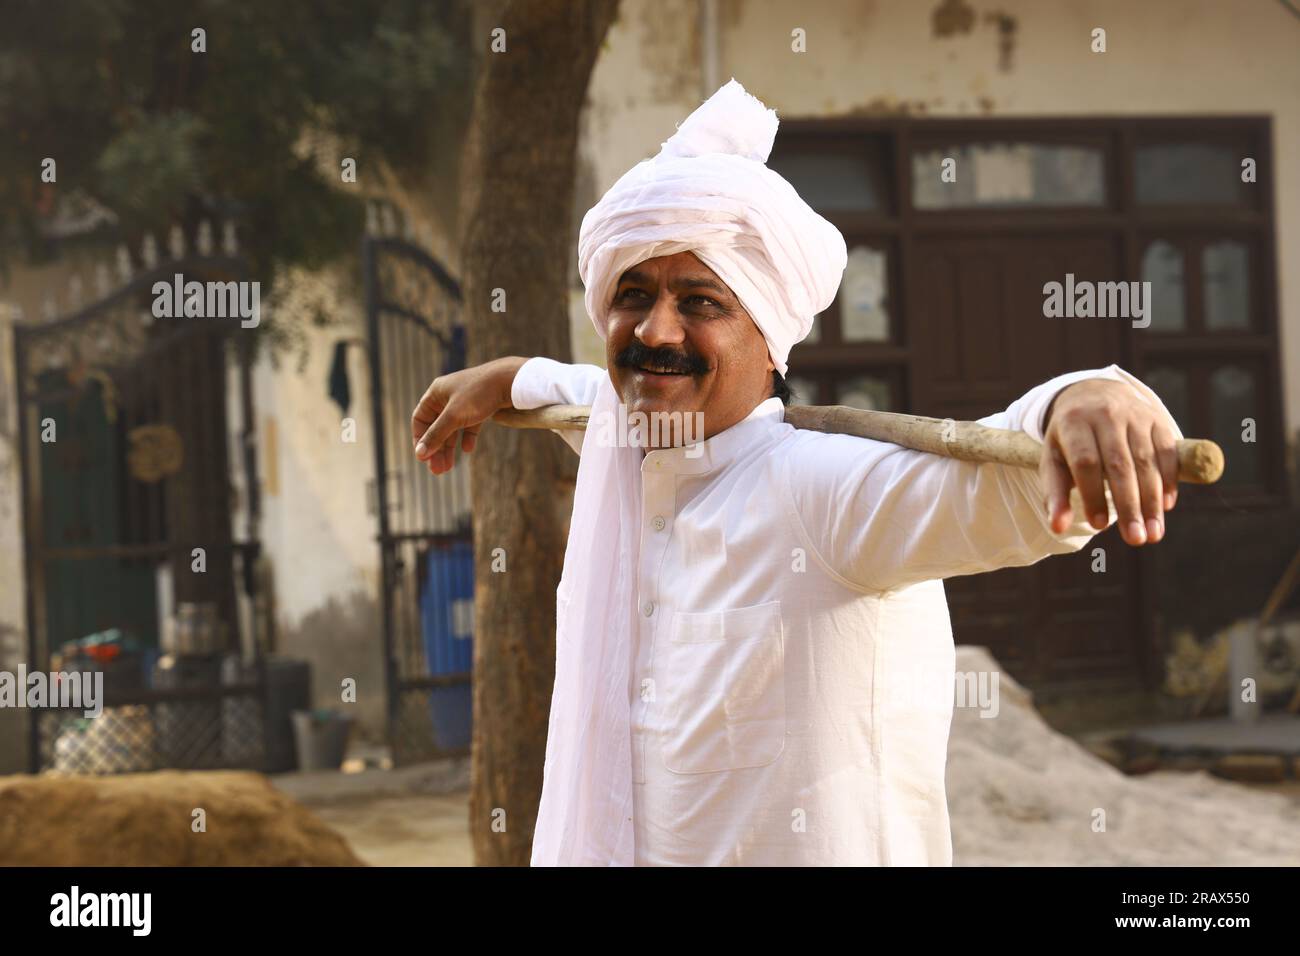 Happy Rural Indian Village man in turban sitting outdoors in a day time.  Holding walking cane. Stock Photo